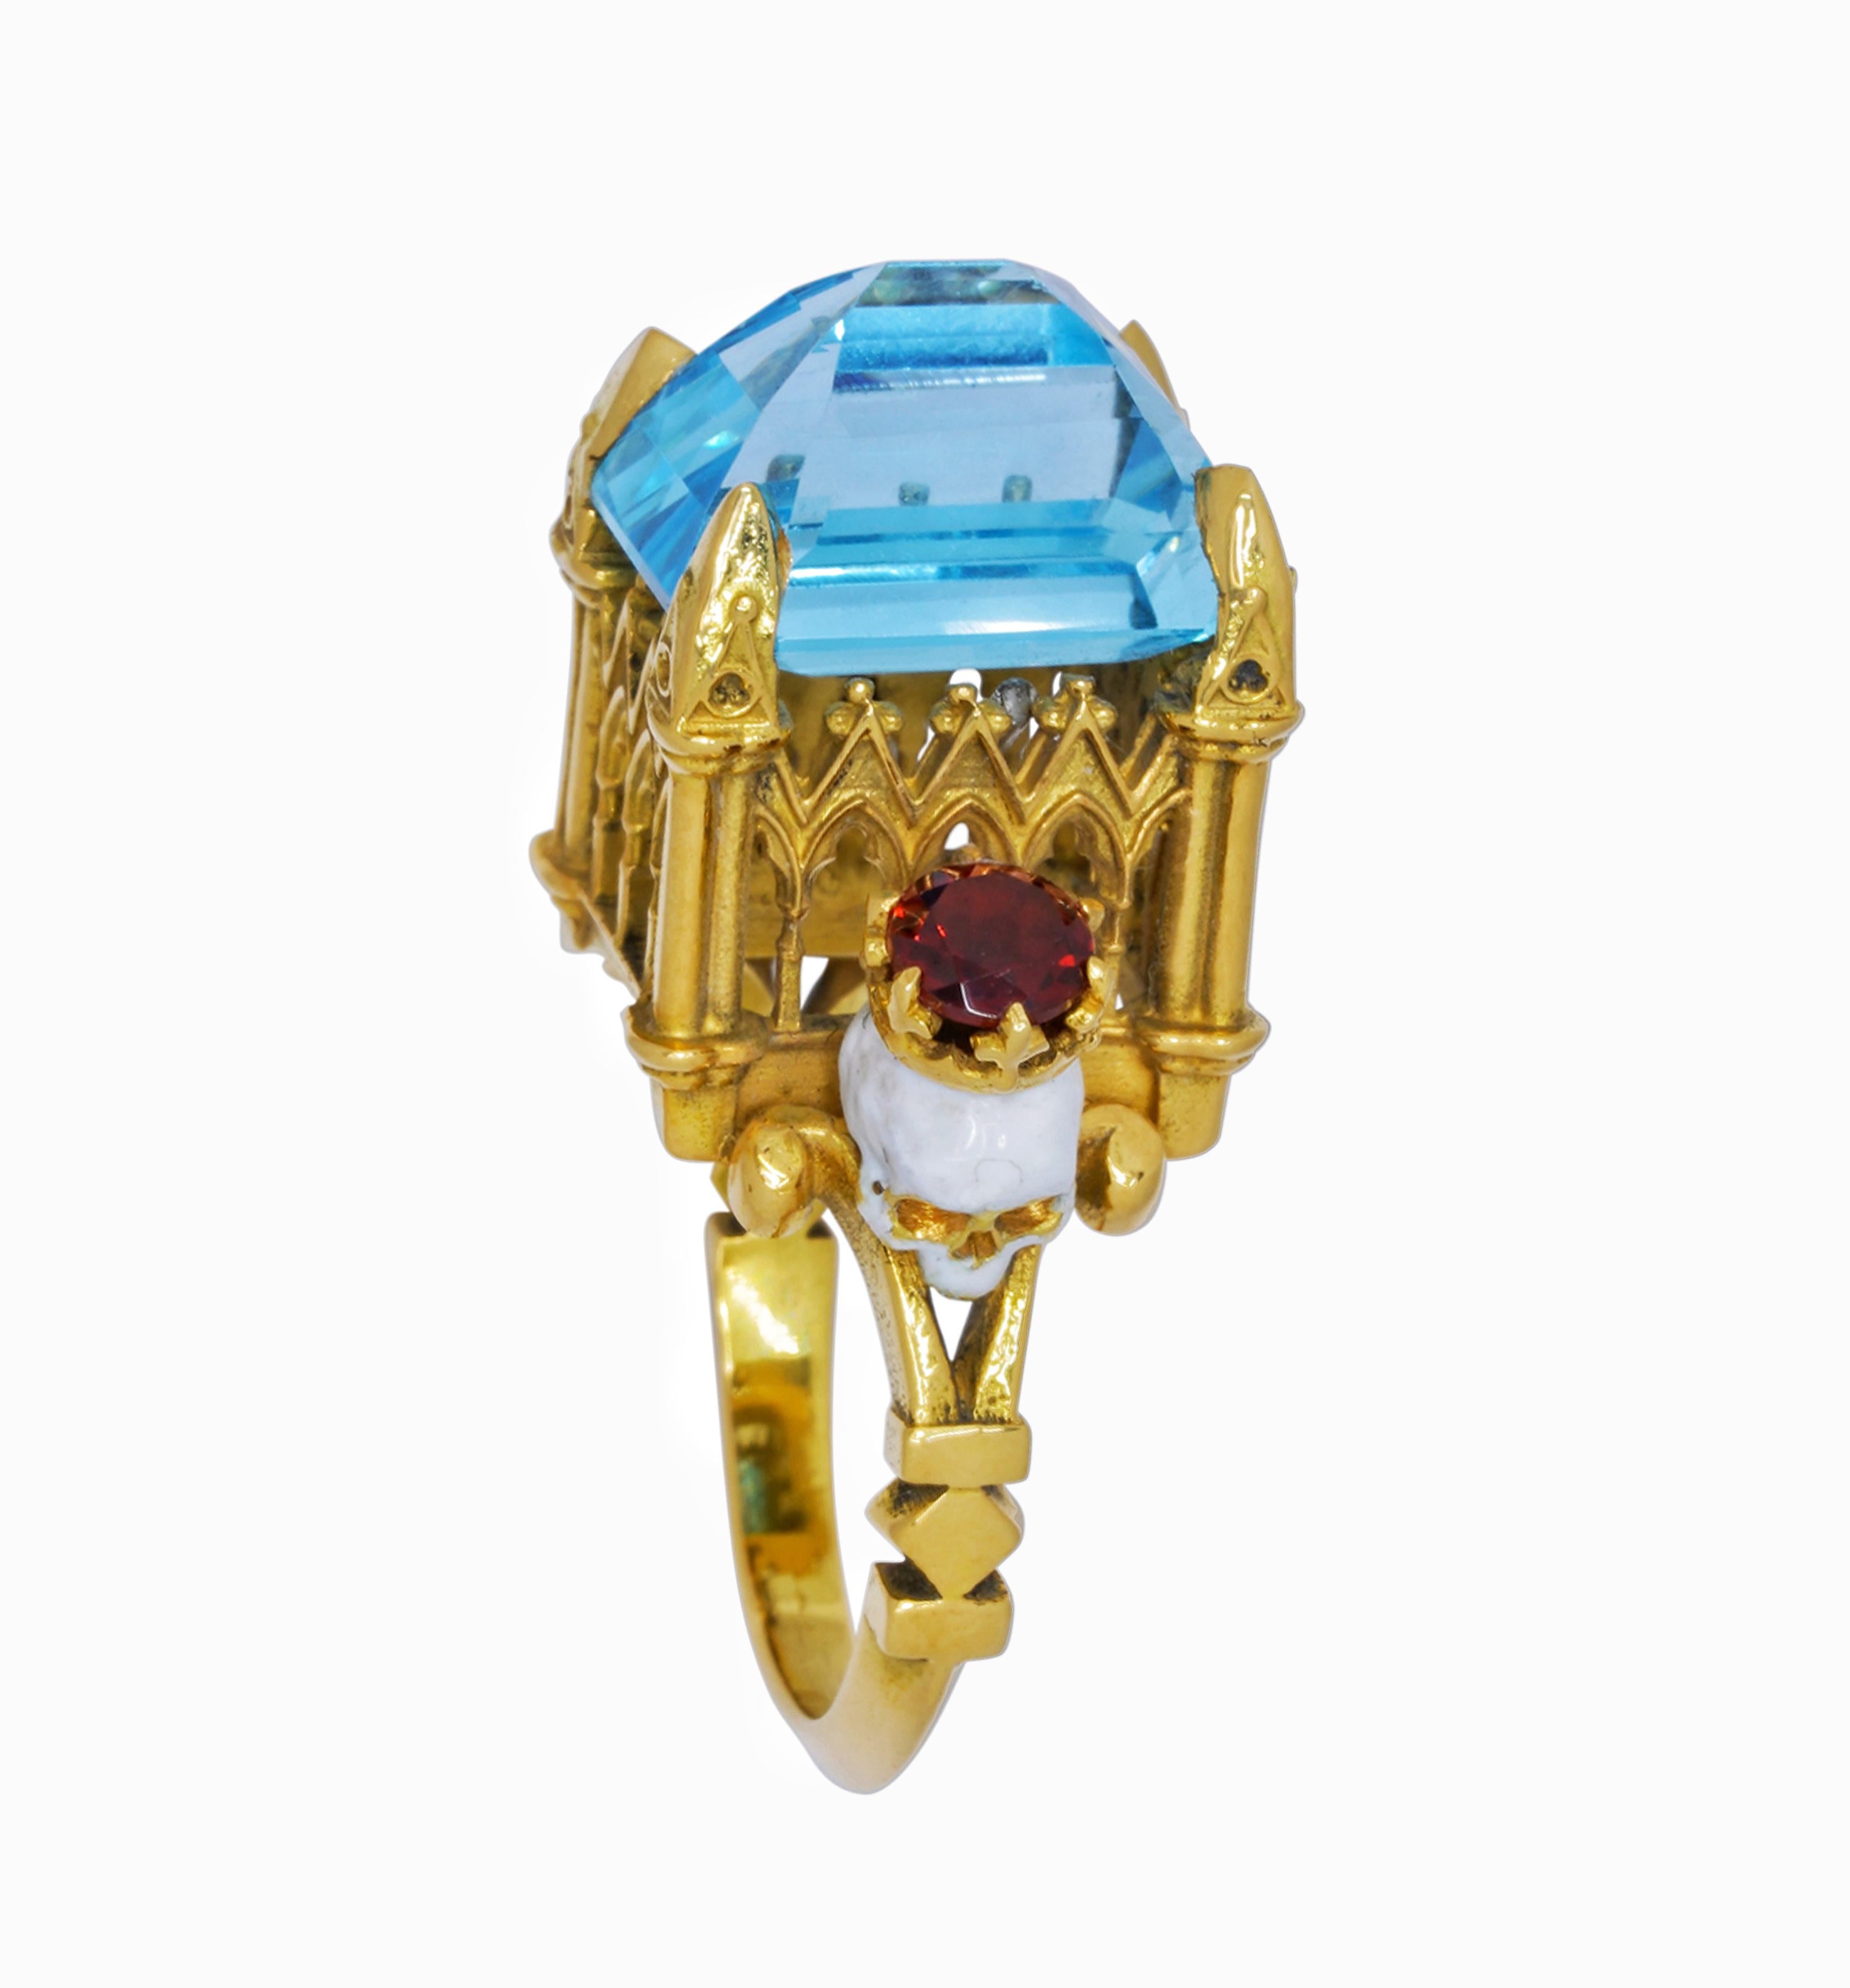 Catacomb Saints Cathedral Ring in 18 Karat Yellow Gold with Topaz and Garnets For Sale 1